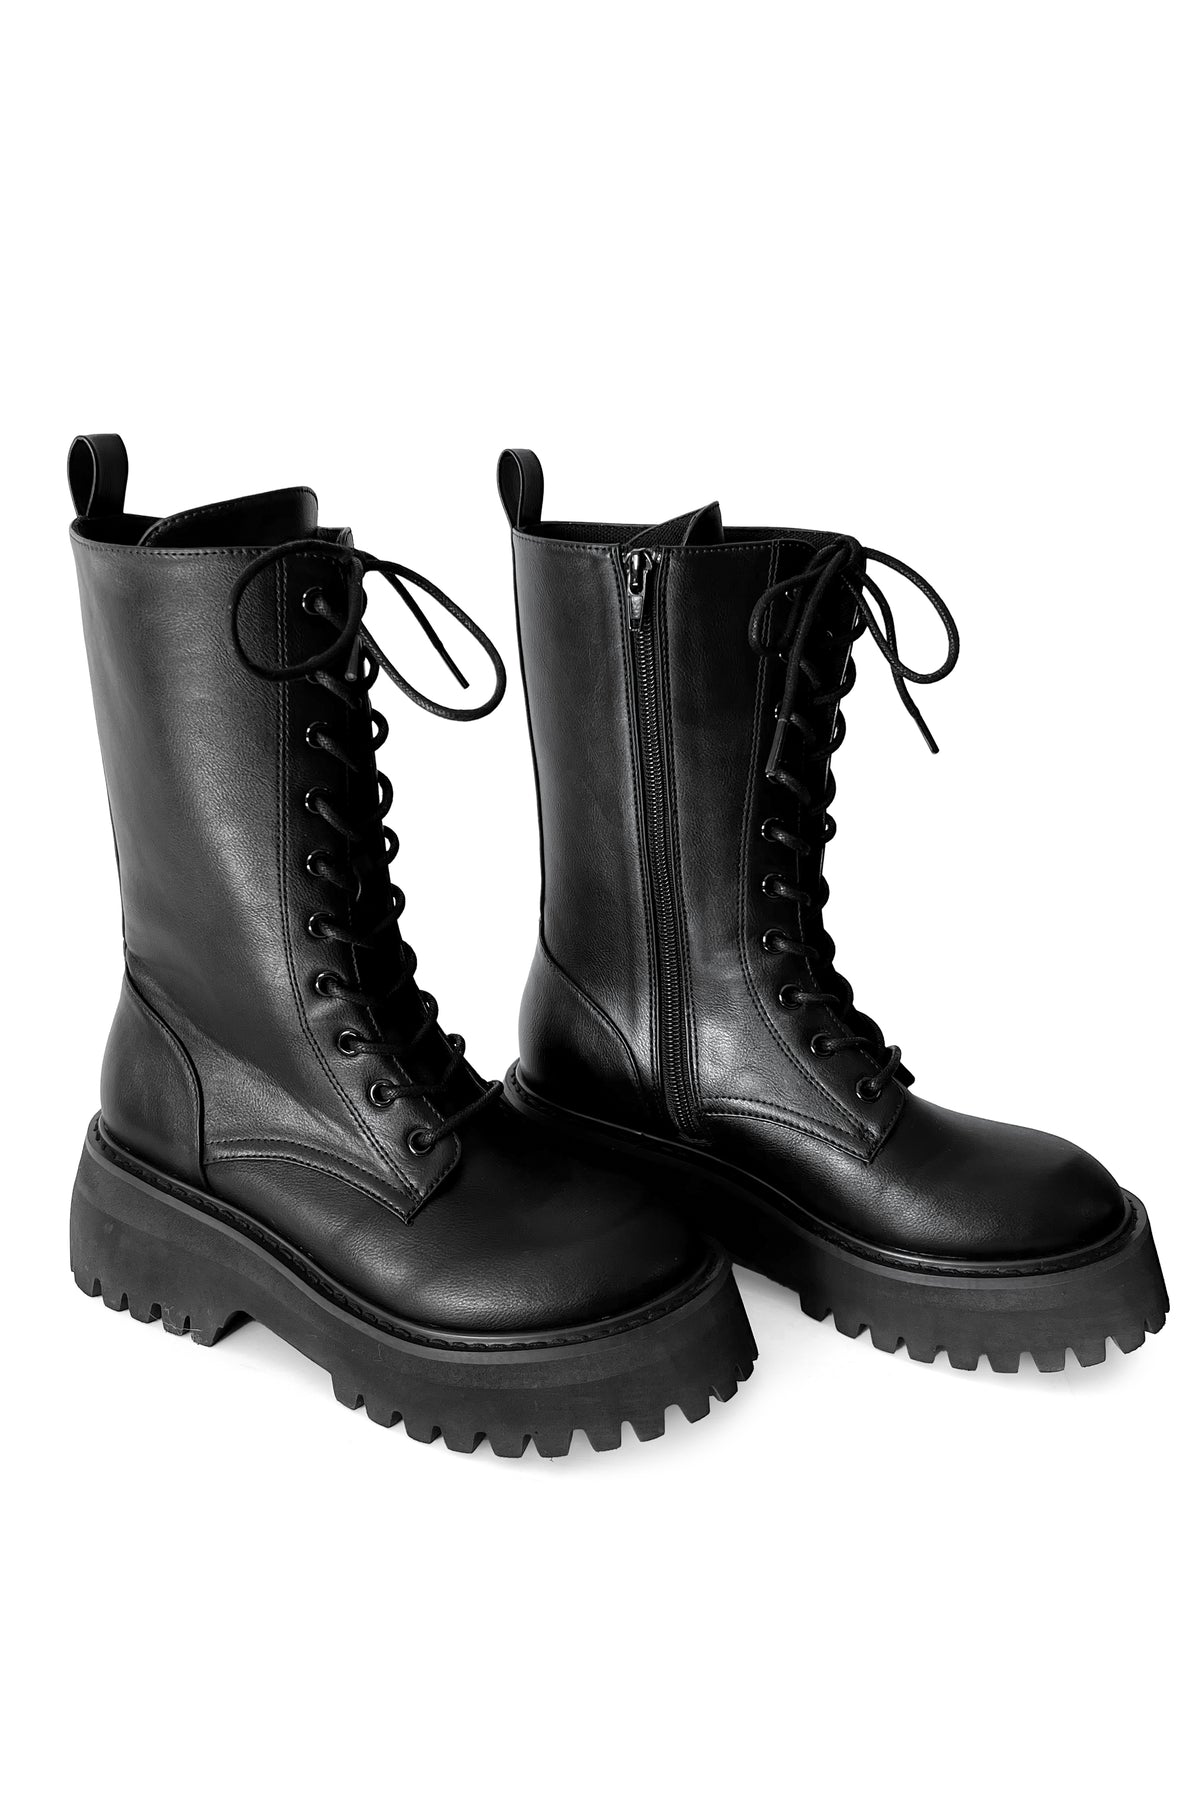 black vegan leather combat boot with chunky sole